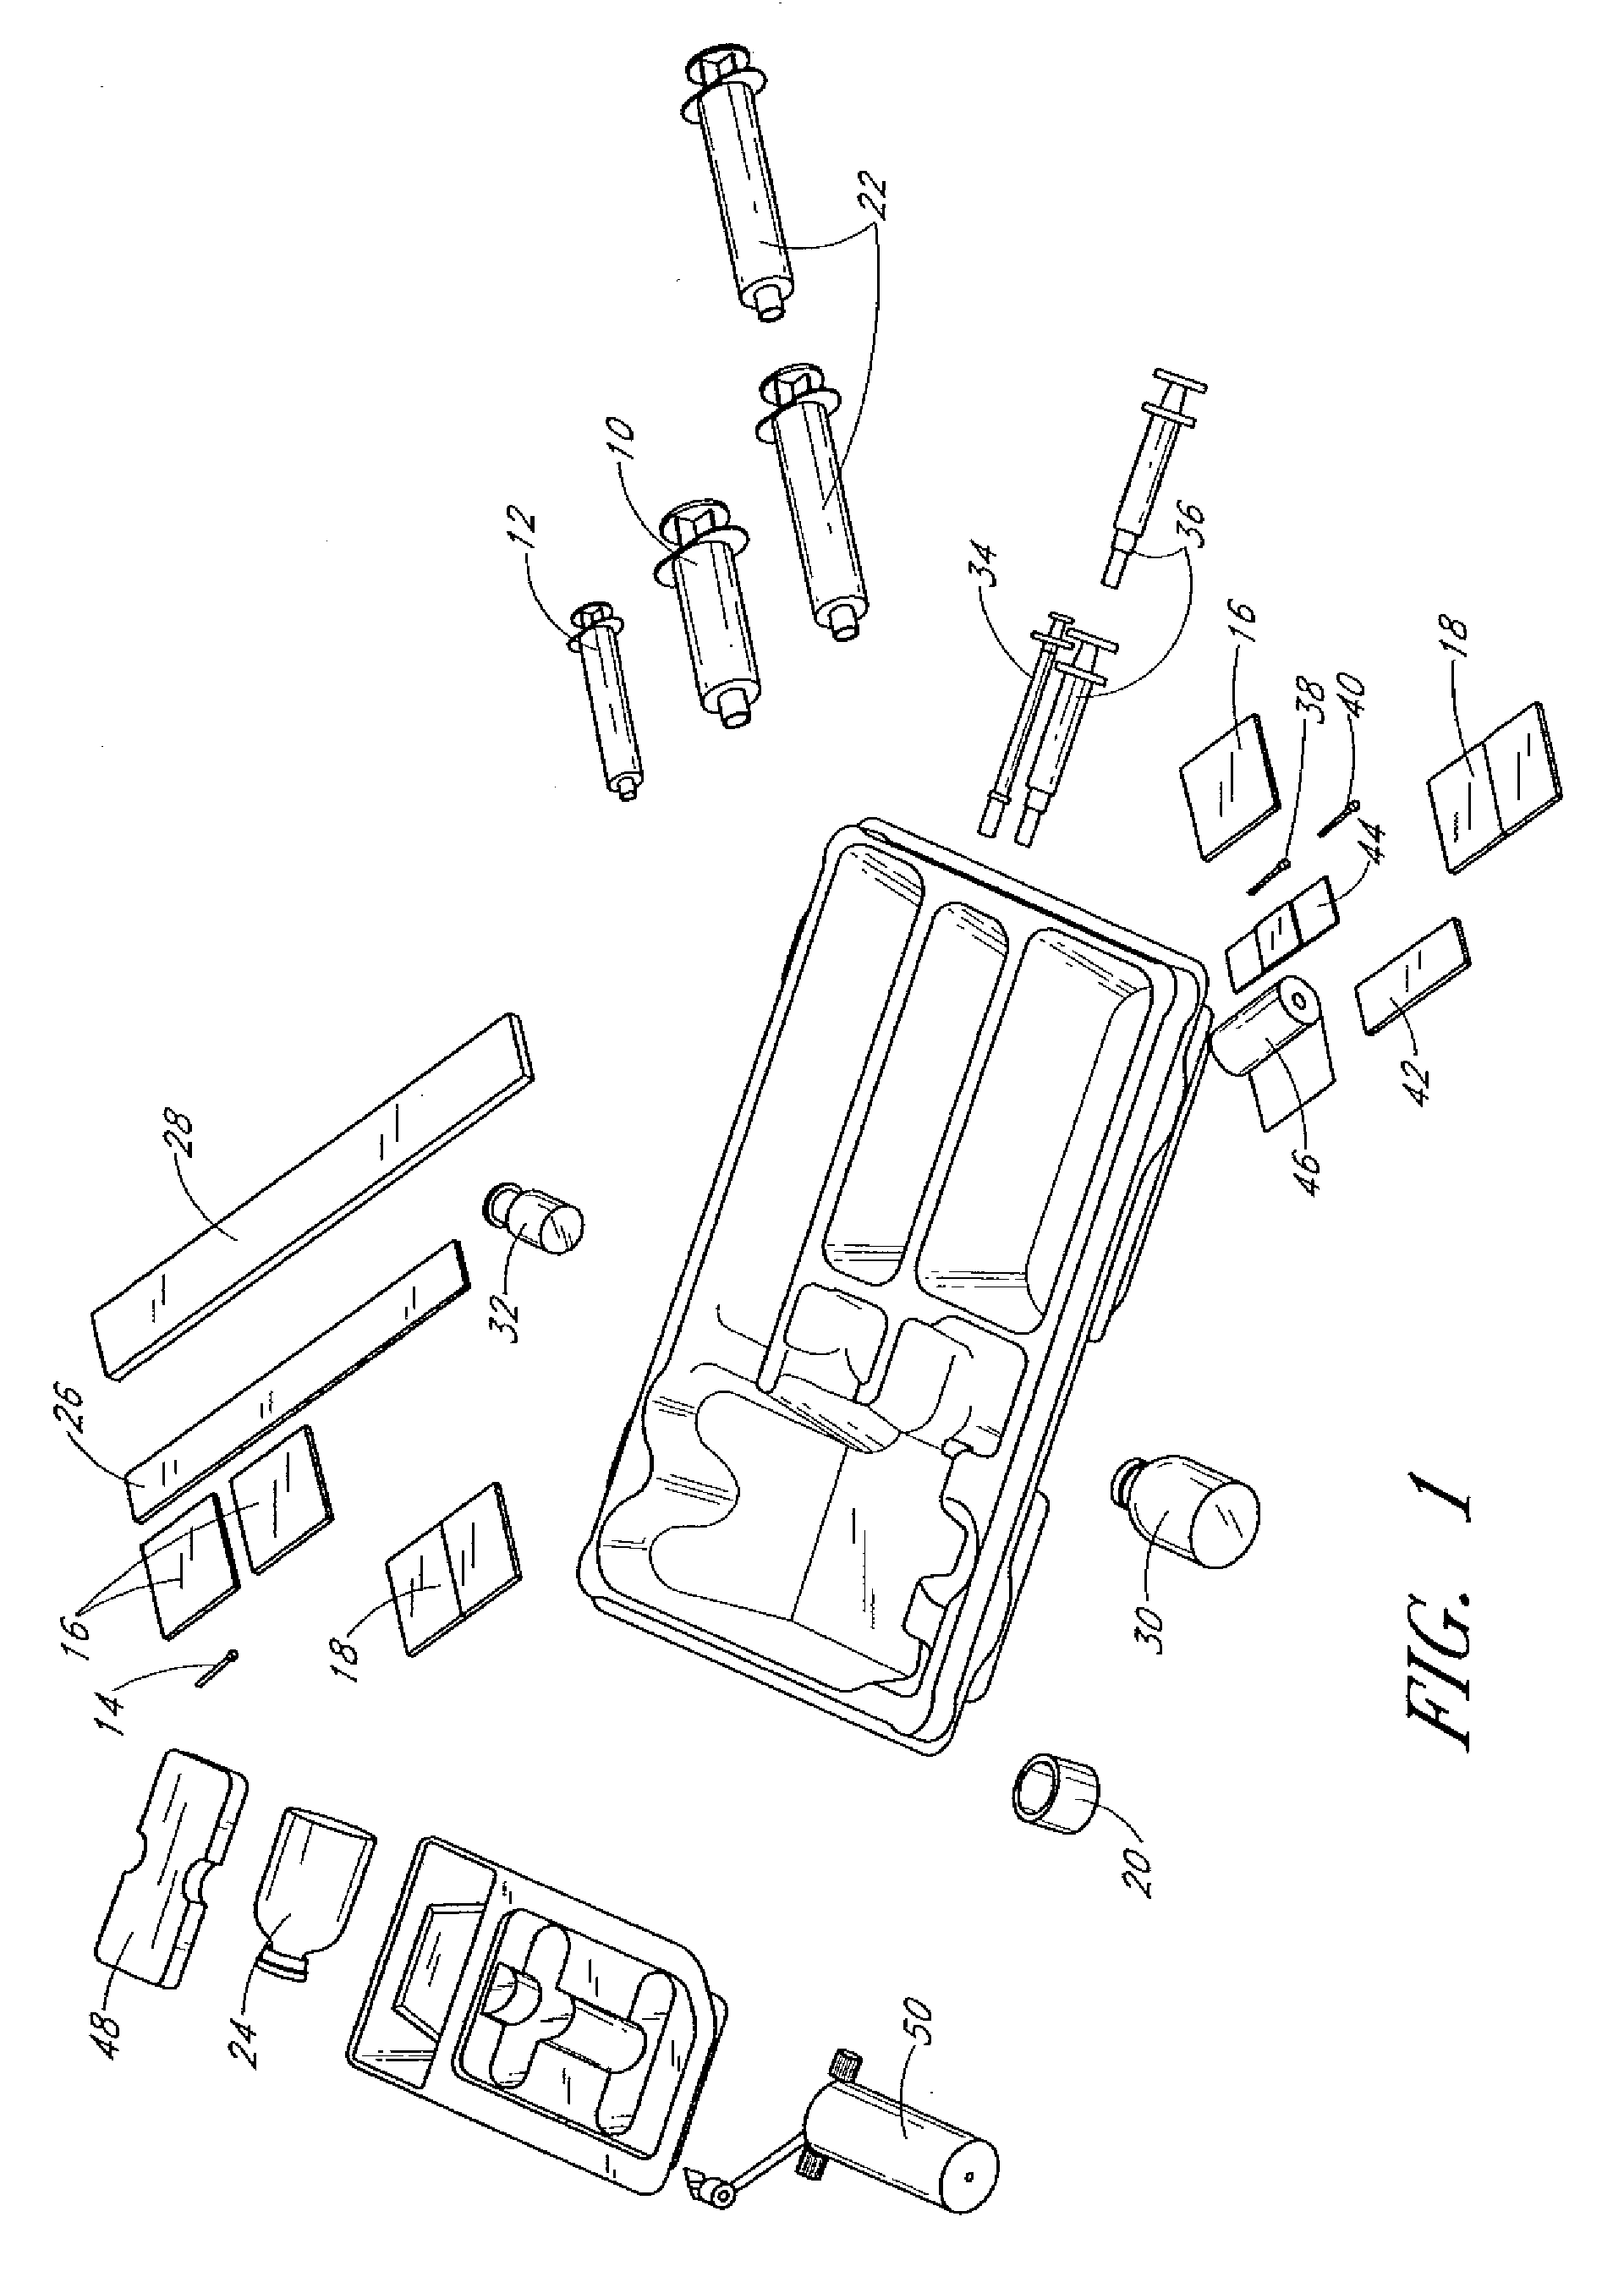 Method for treatment of tissue lesion